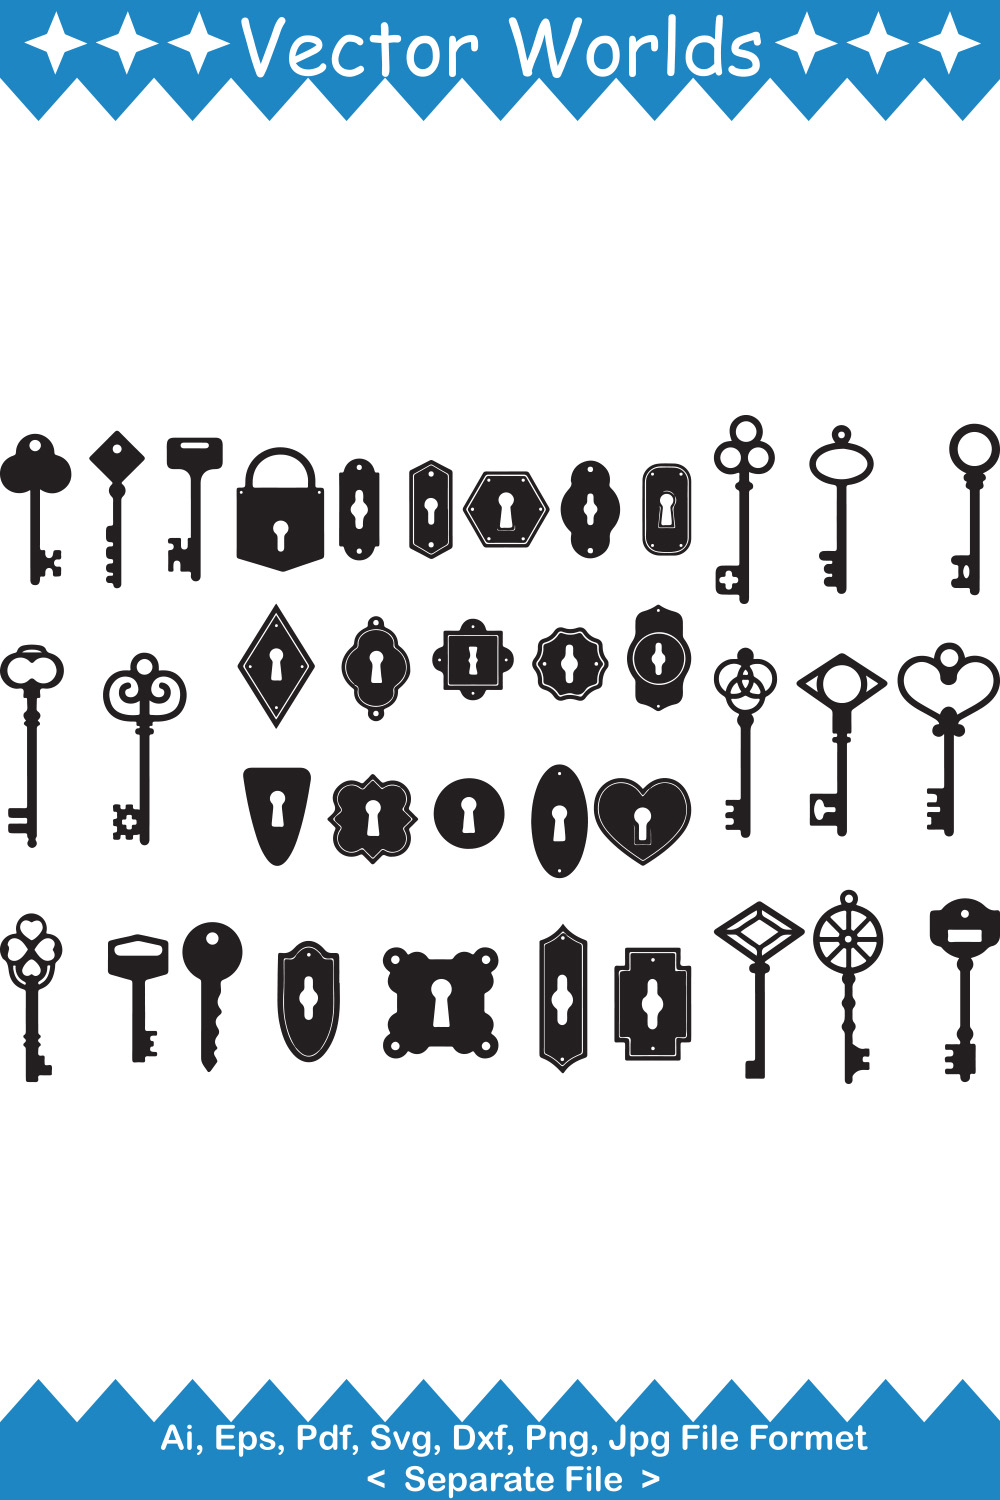 Collection of amazing images of silhouettes of door locks and keys